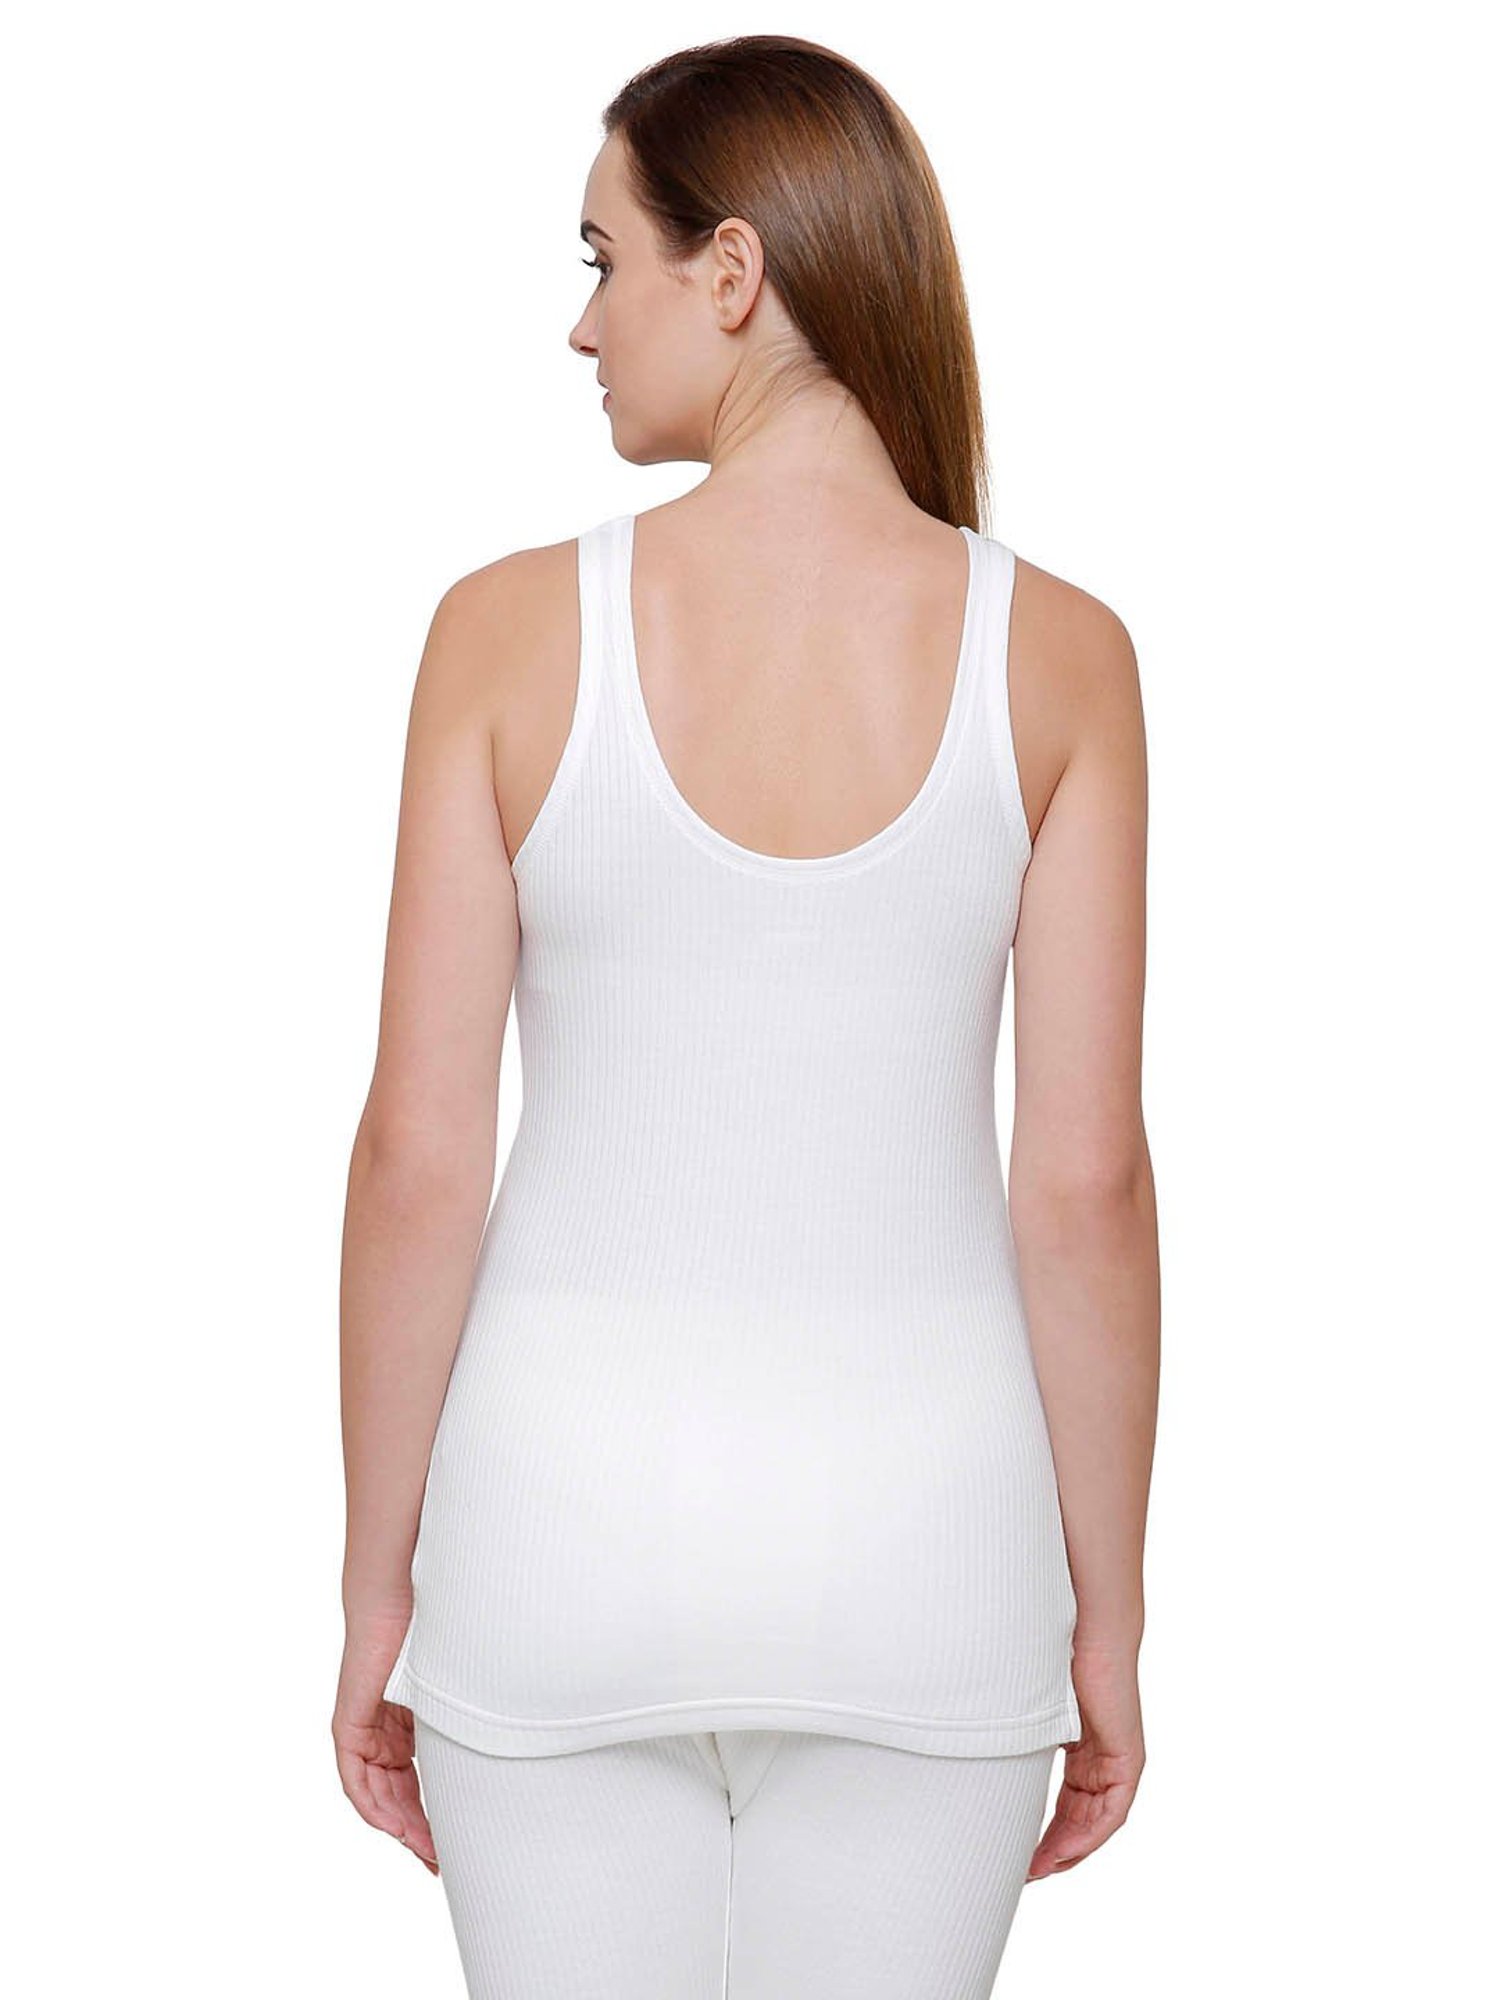 Buy Dyca Off White Thermal Camisole for Women Online @ Tata CLiQ